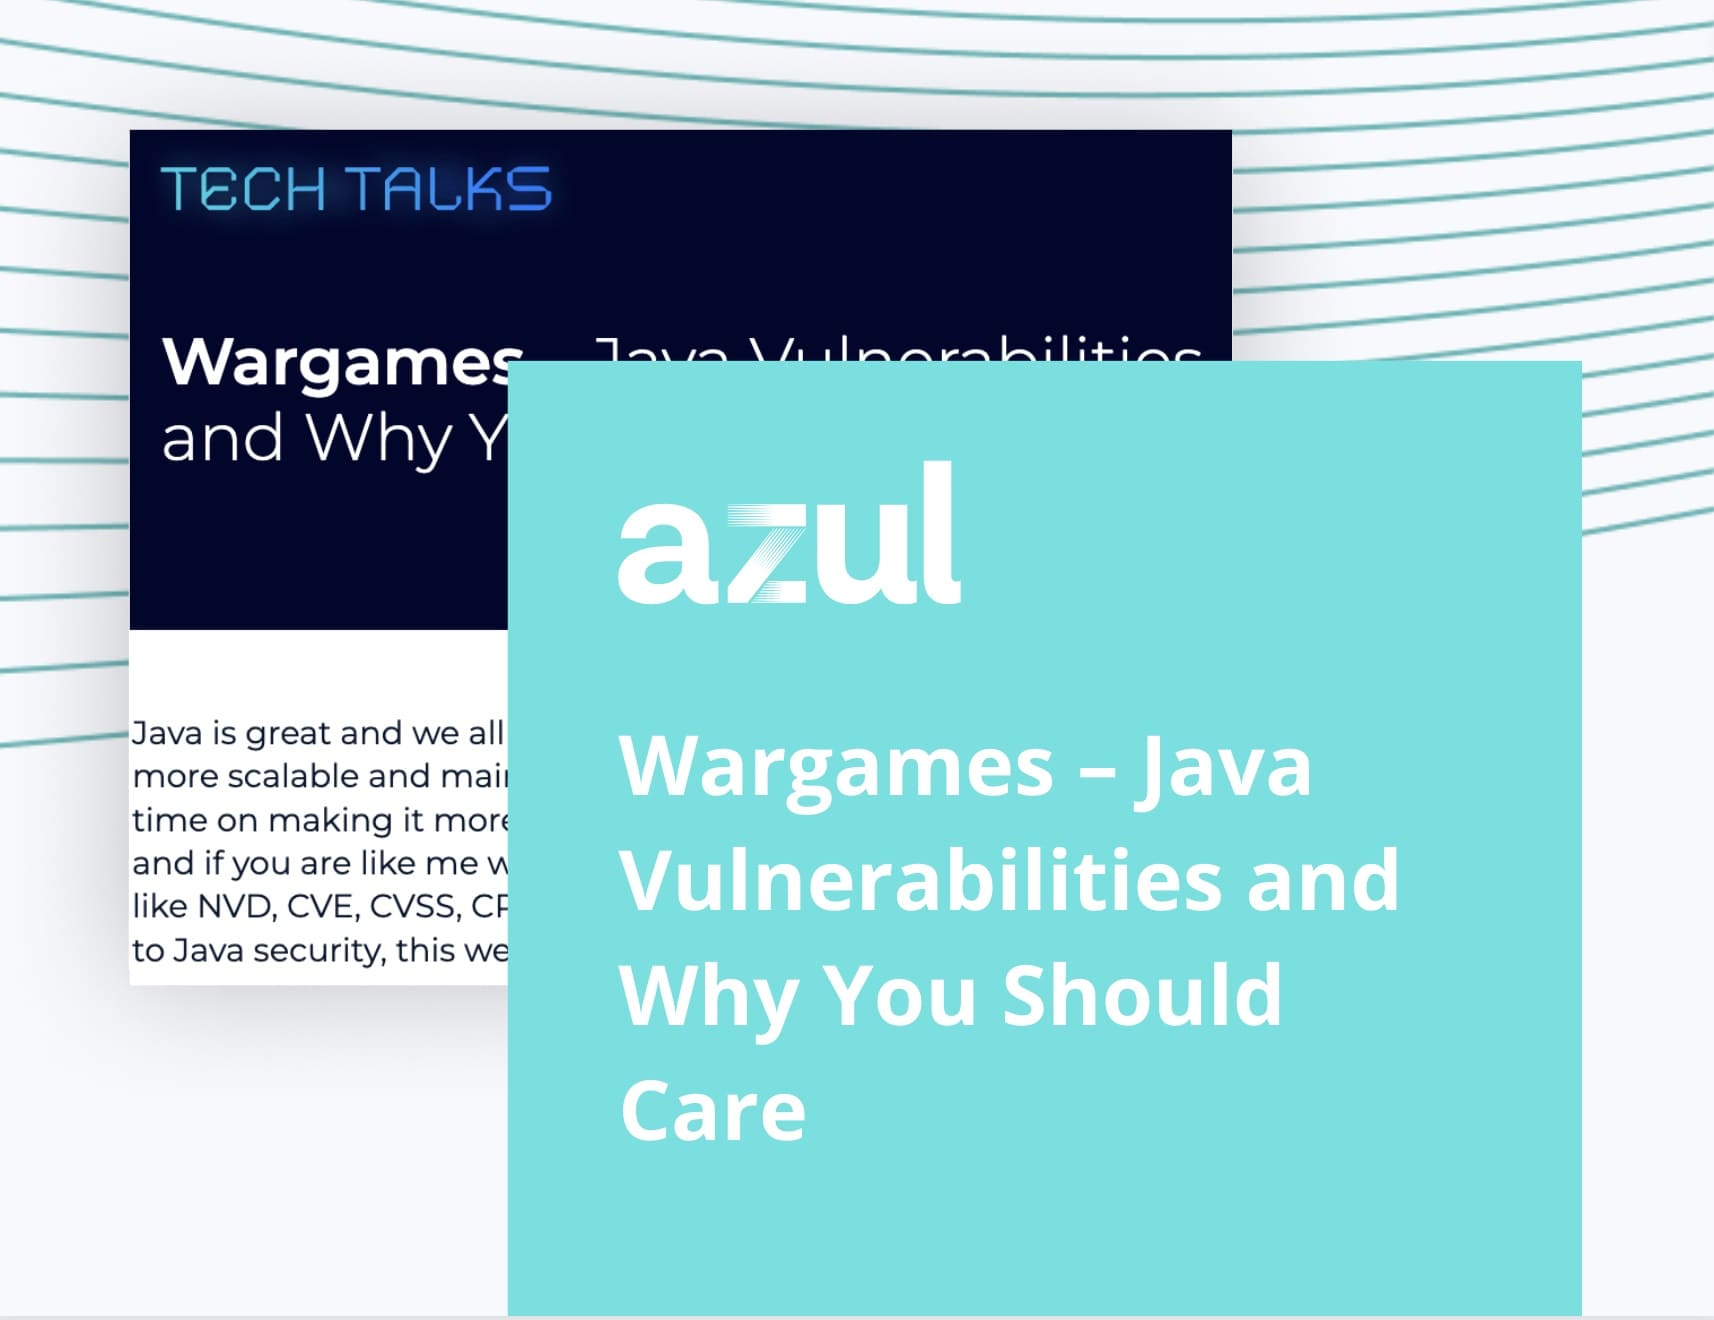 Wargames – Java Vulnerabilities and Why You Should Care